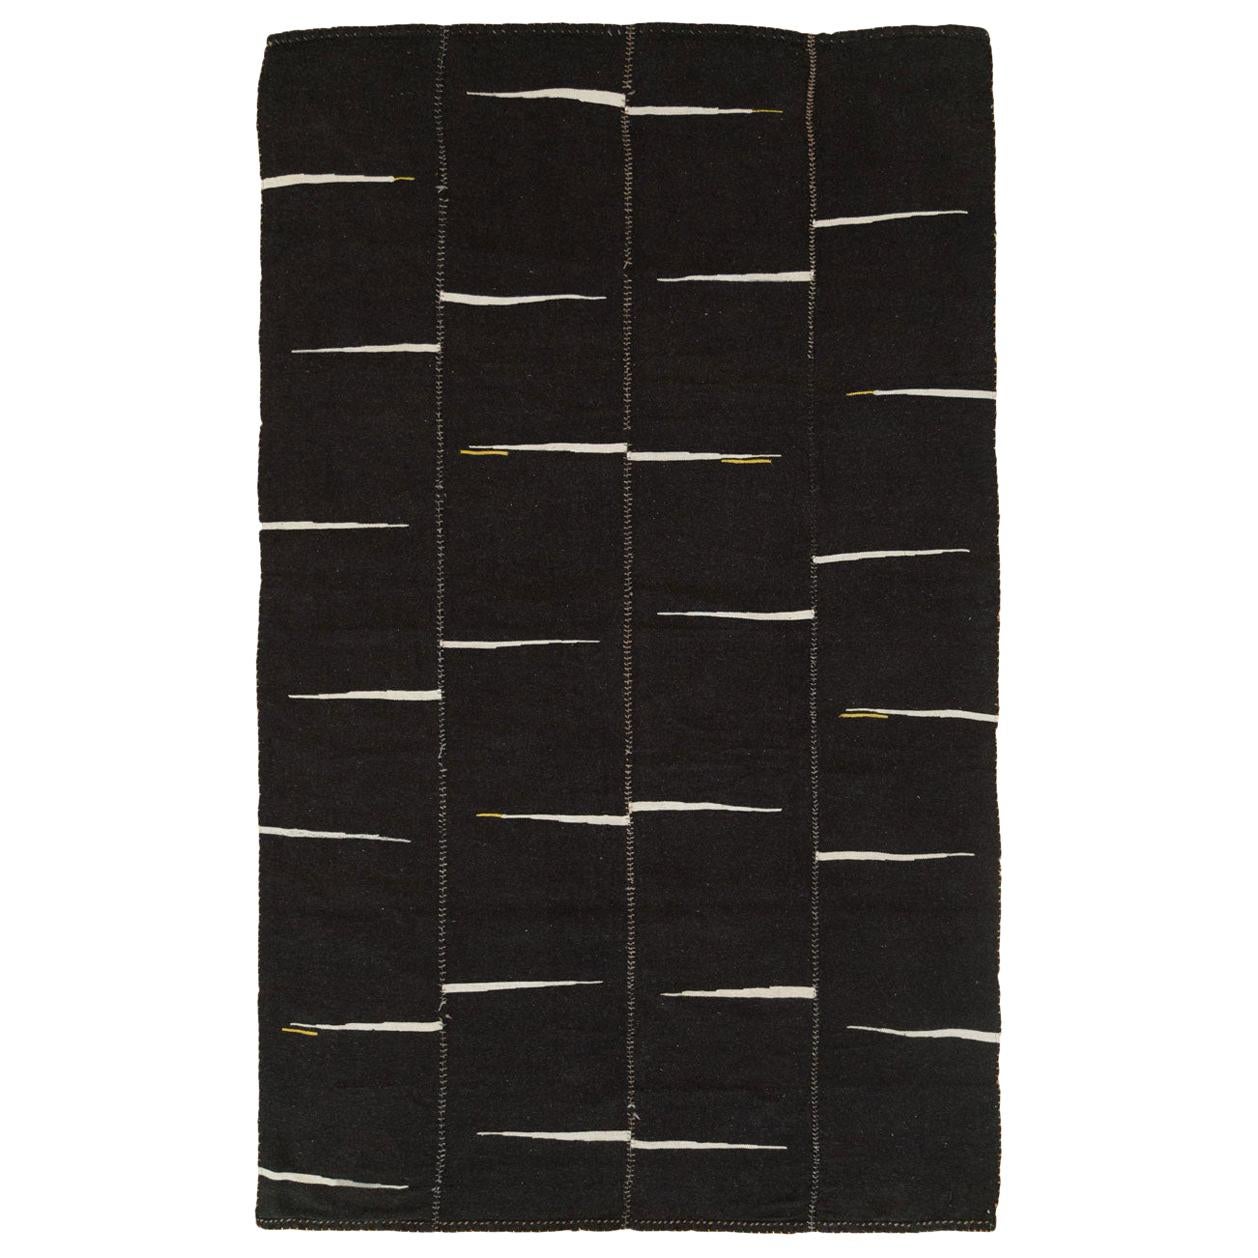 Contemporary 21st Century Persian Flat-Weave Kilim Room Size Accent Rug in Black For Sale